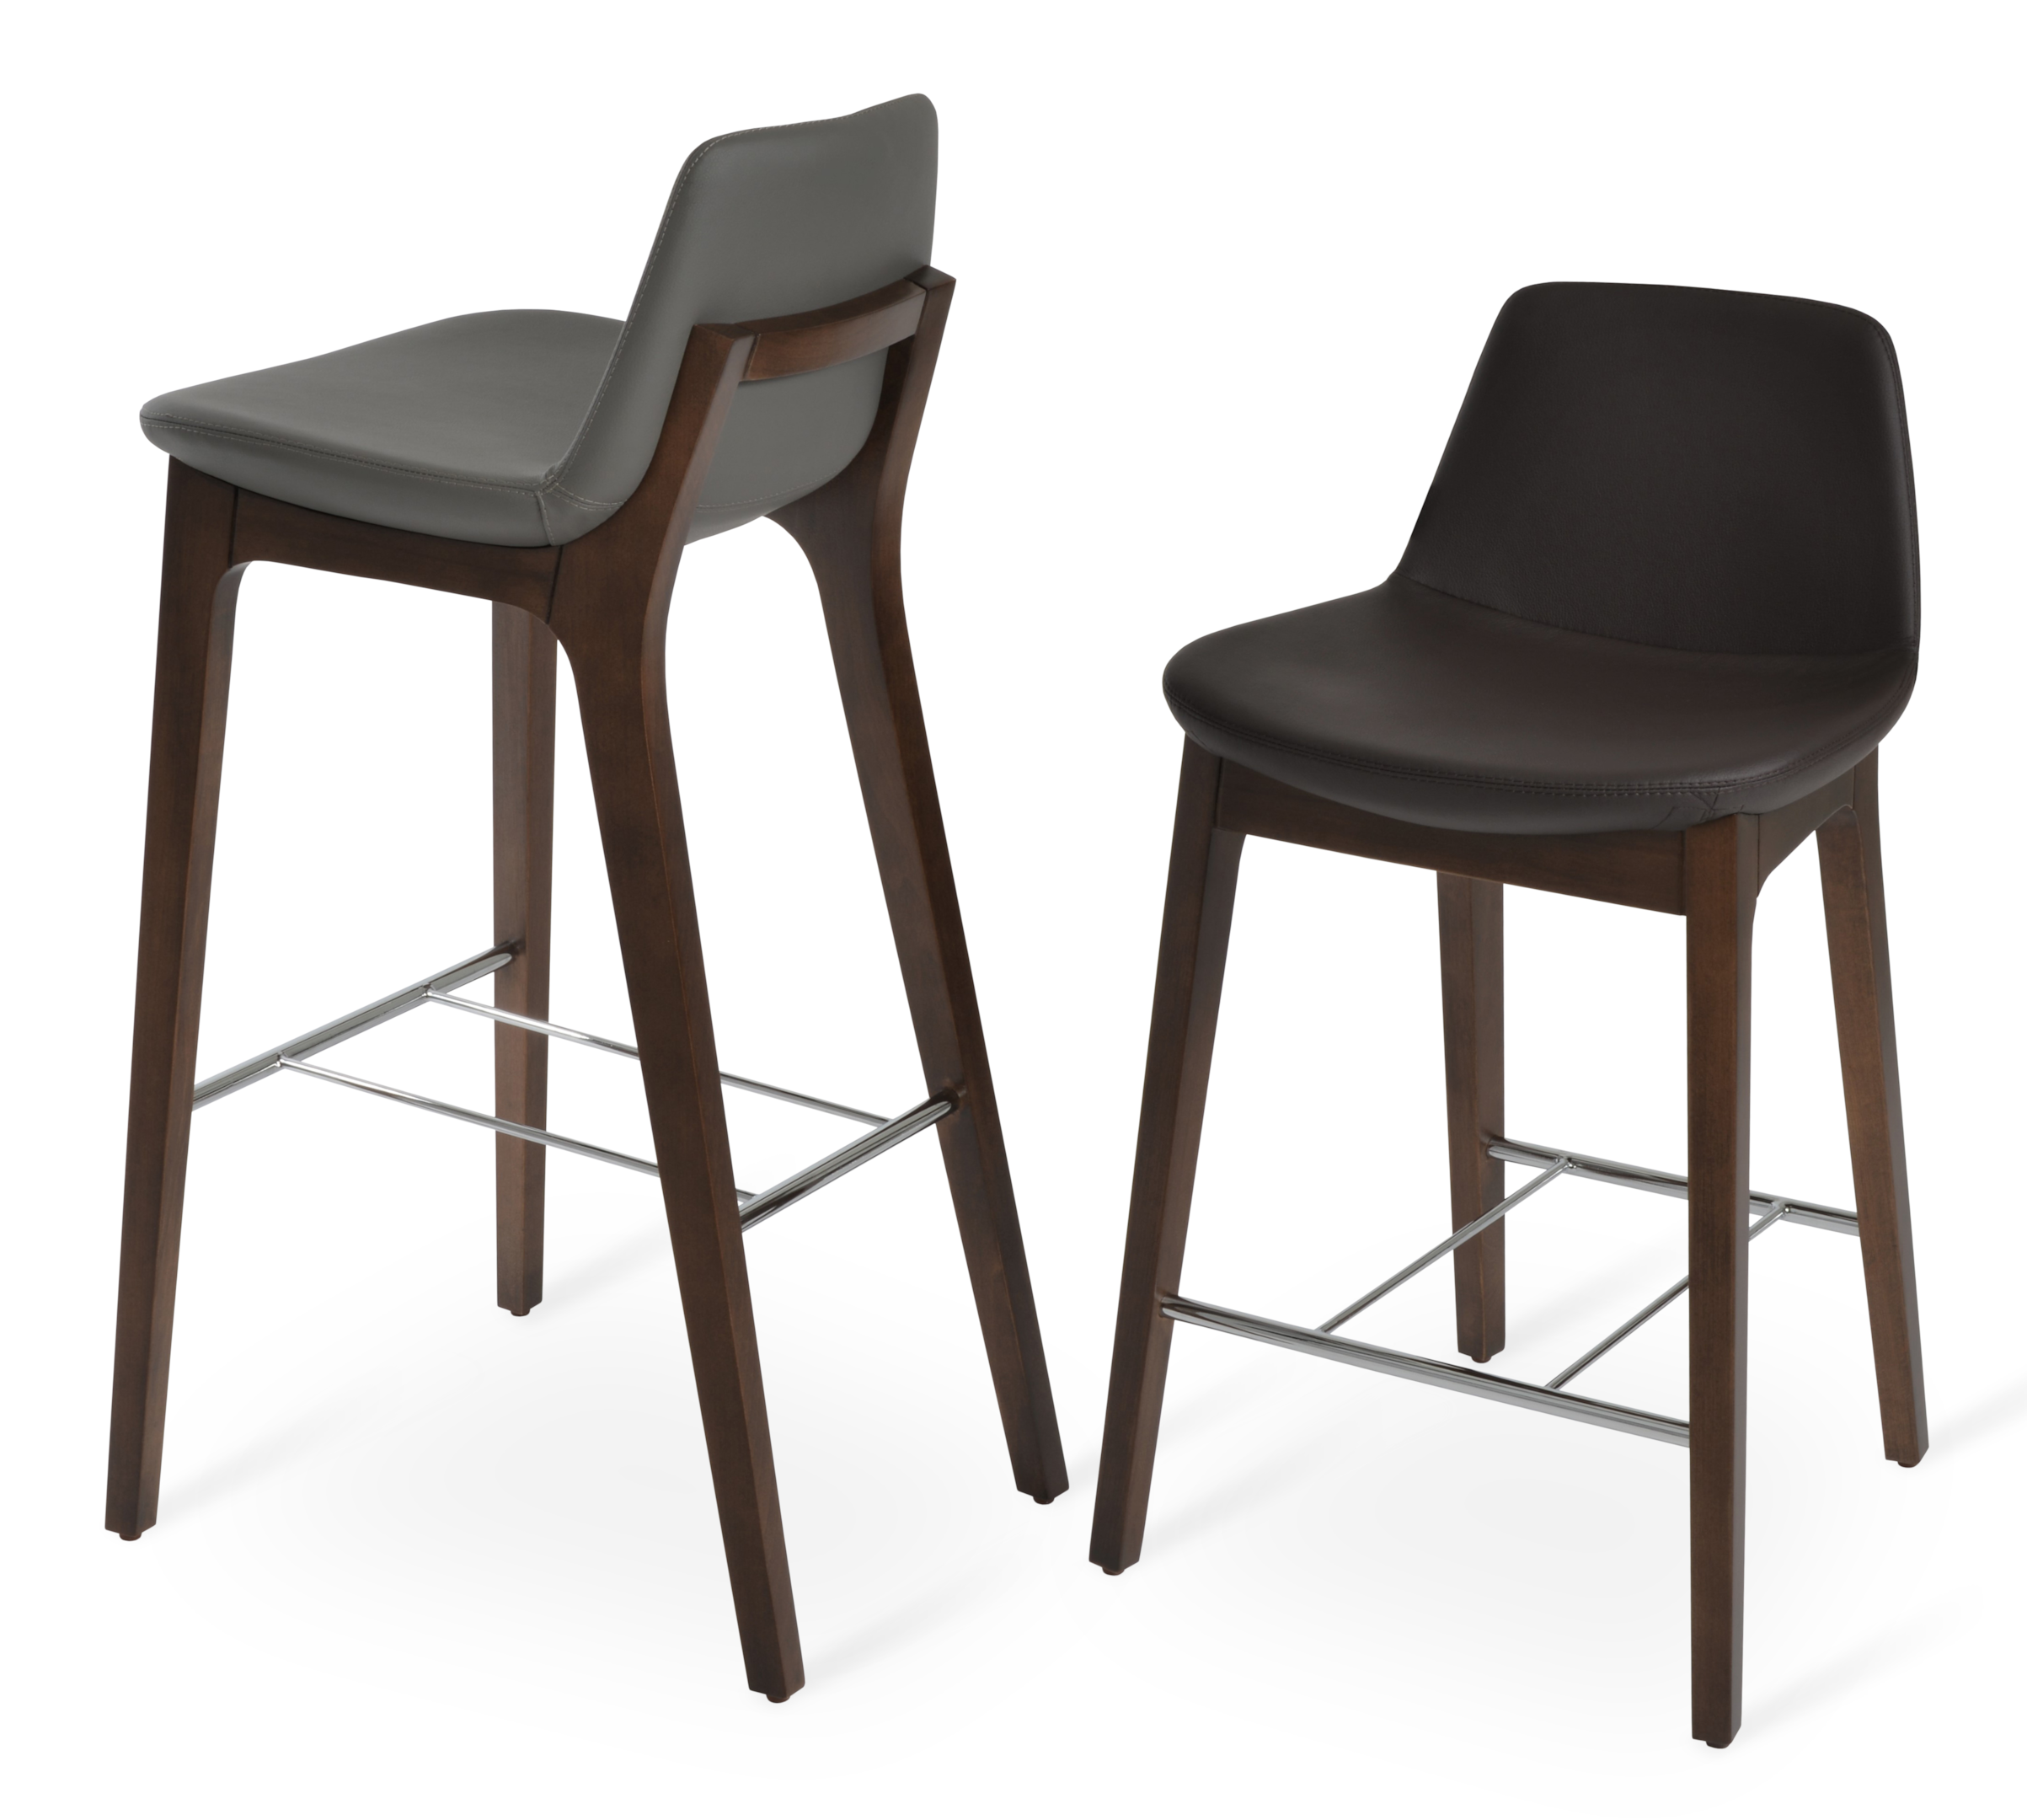 Choosing the perfect seat height for bar chairs